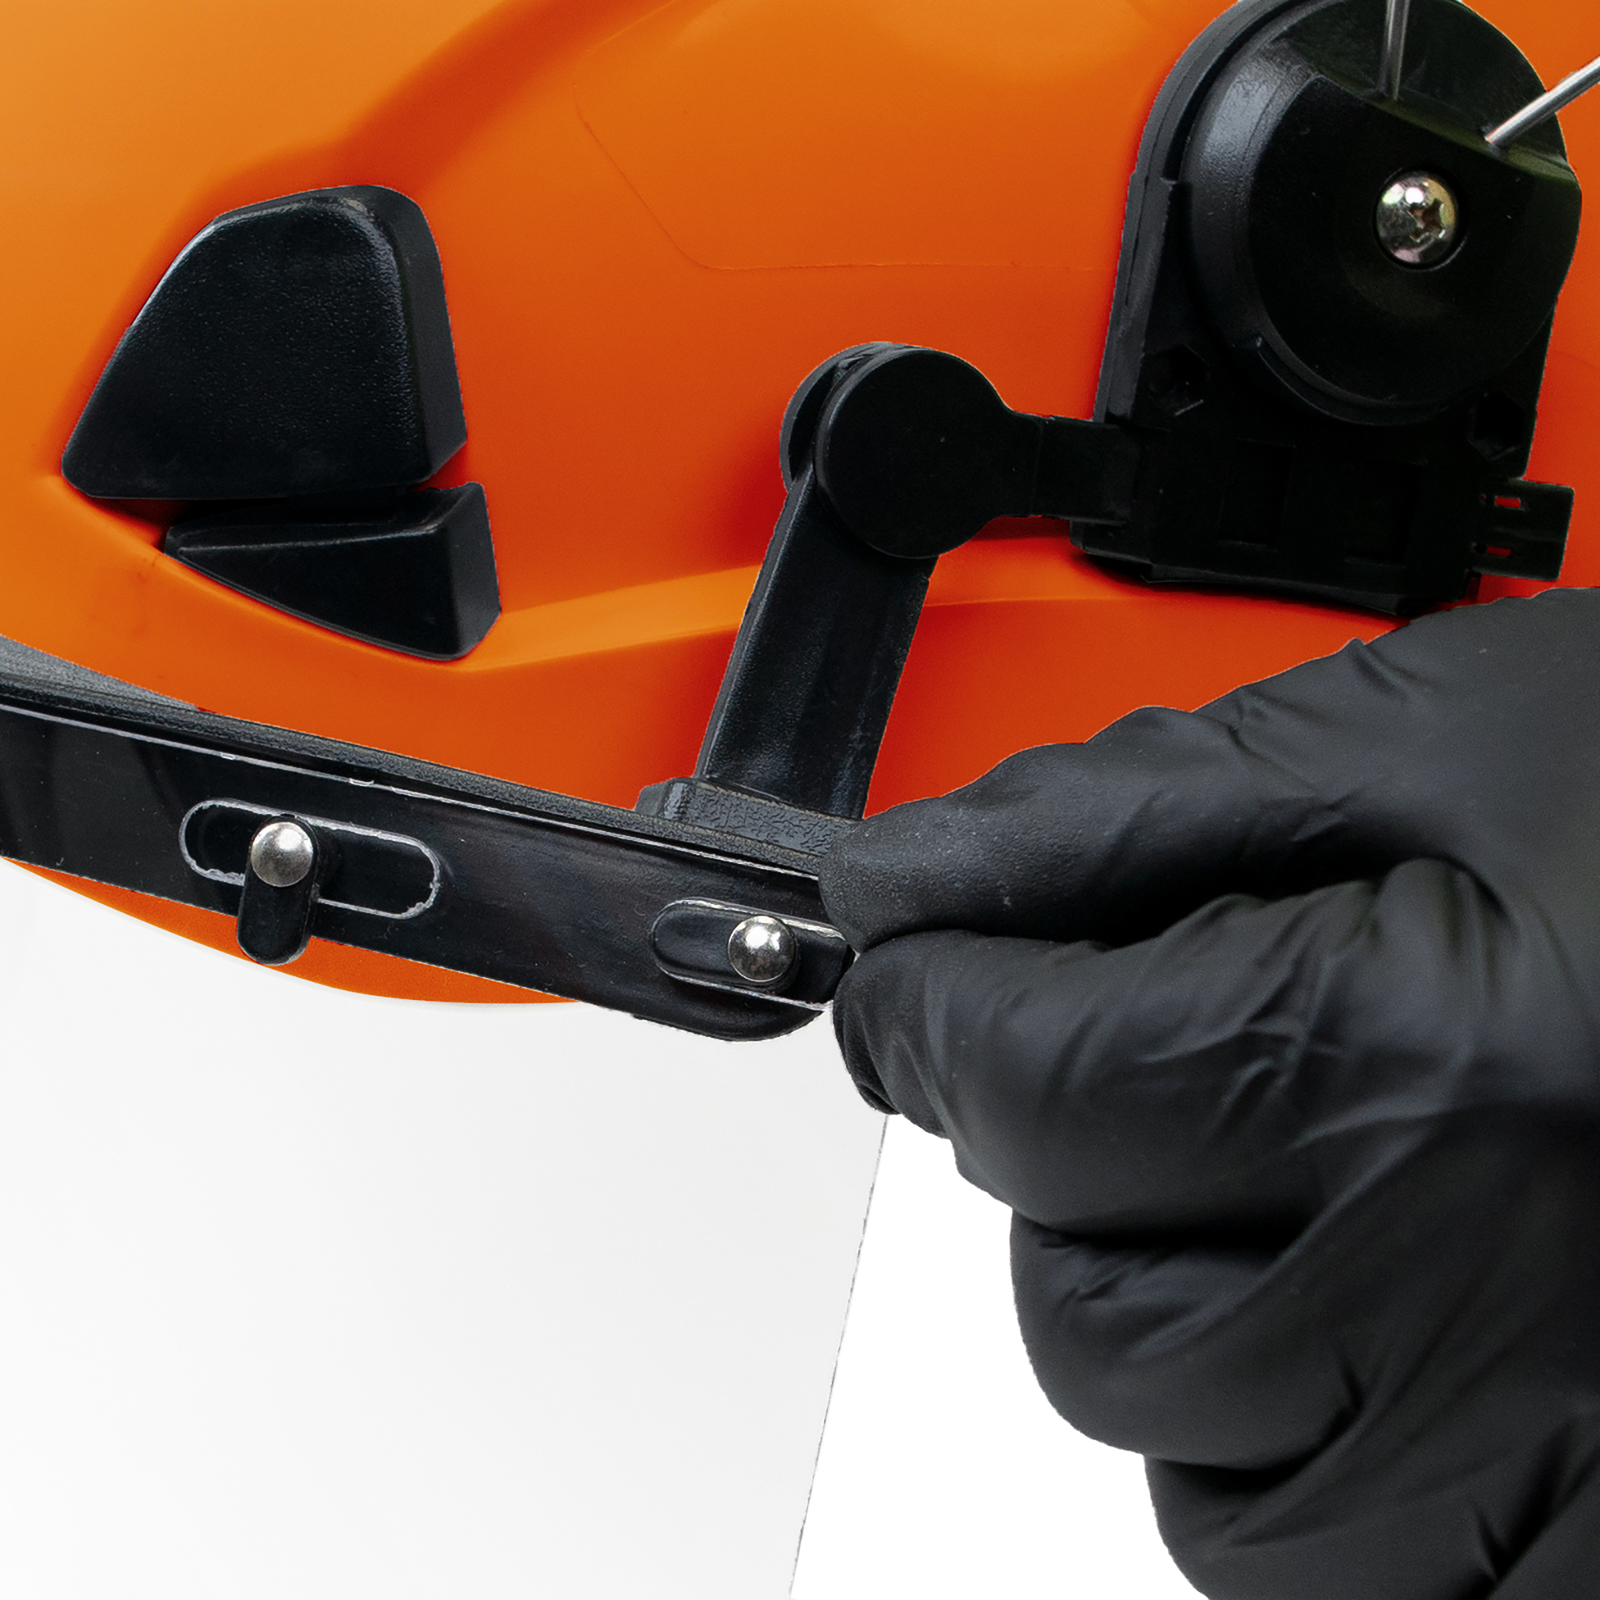 Close-up Image of a person mounting a face shield onto the Jorestech orange 3-in-1 helmet